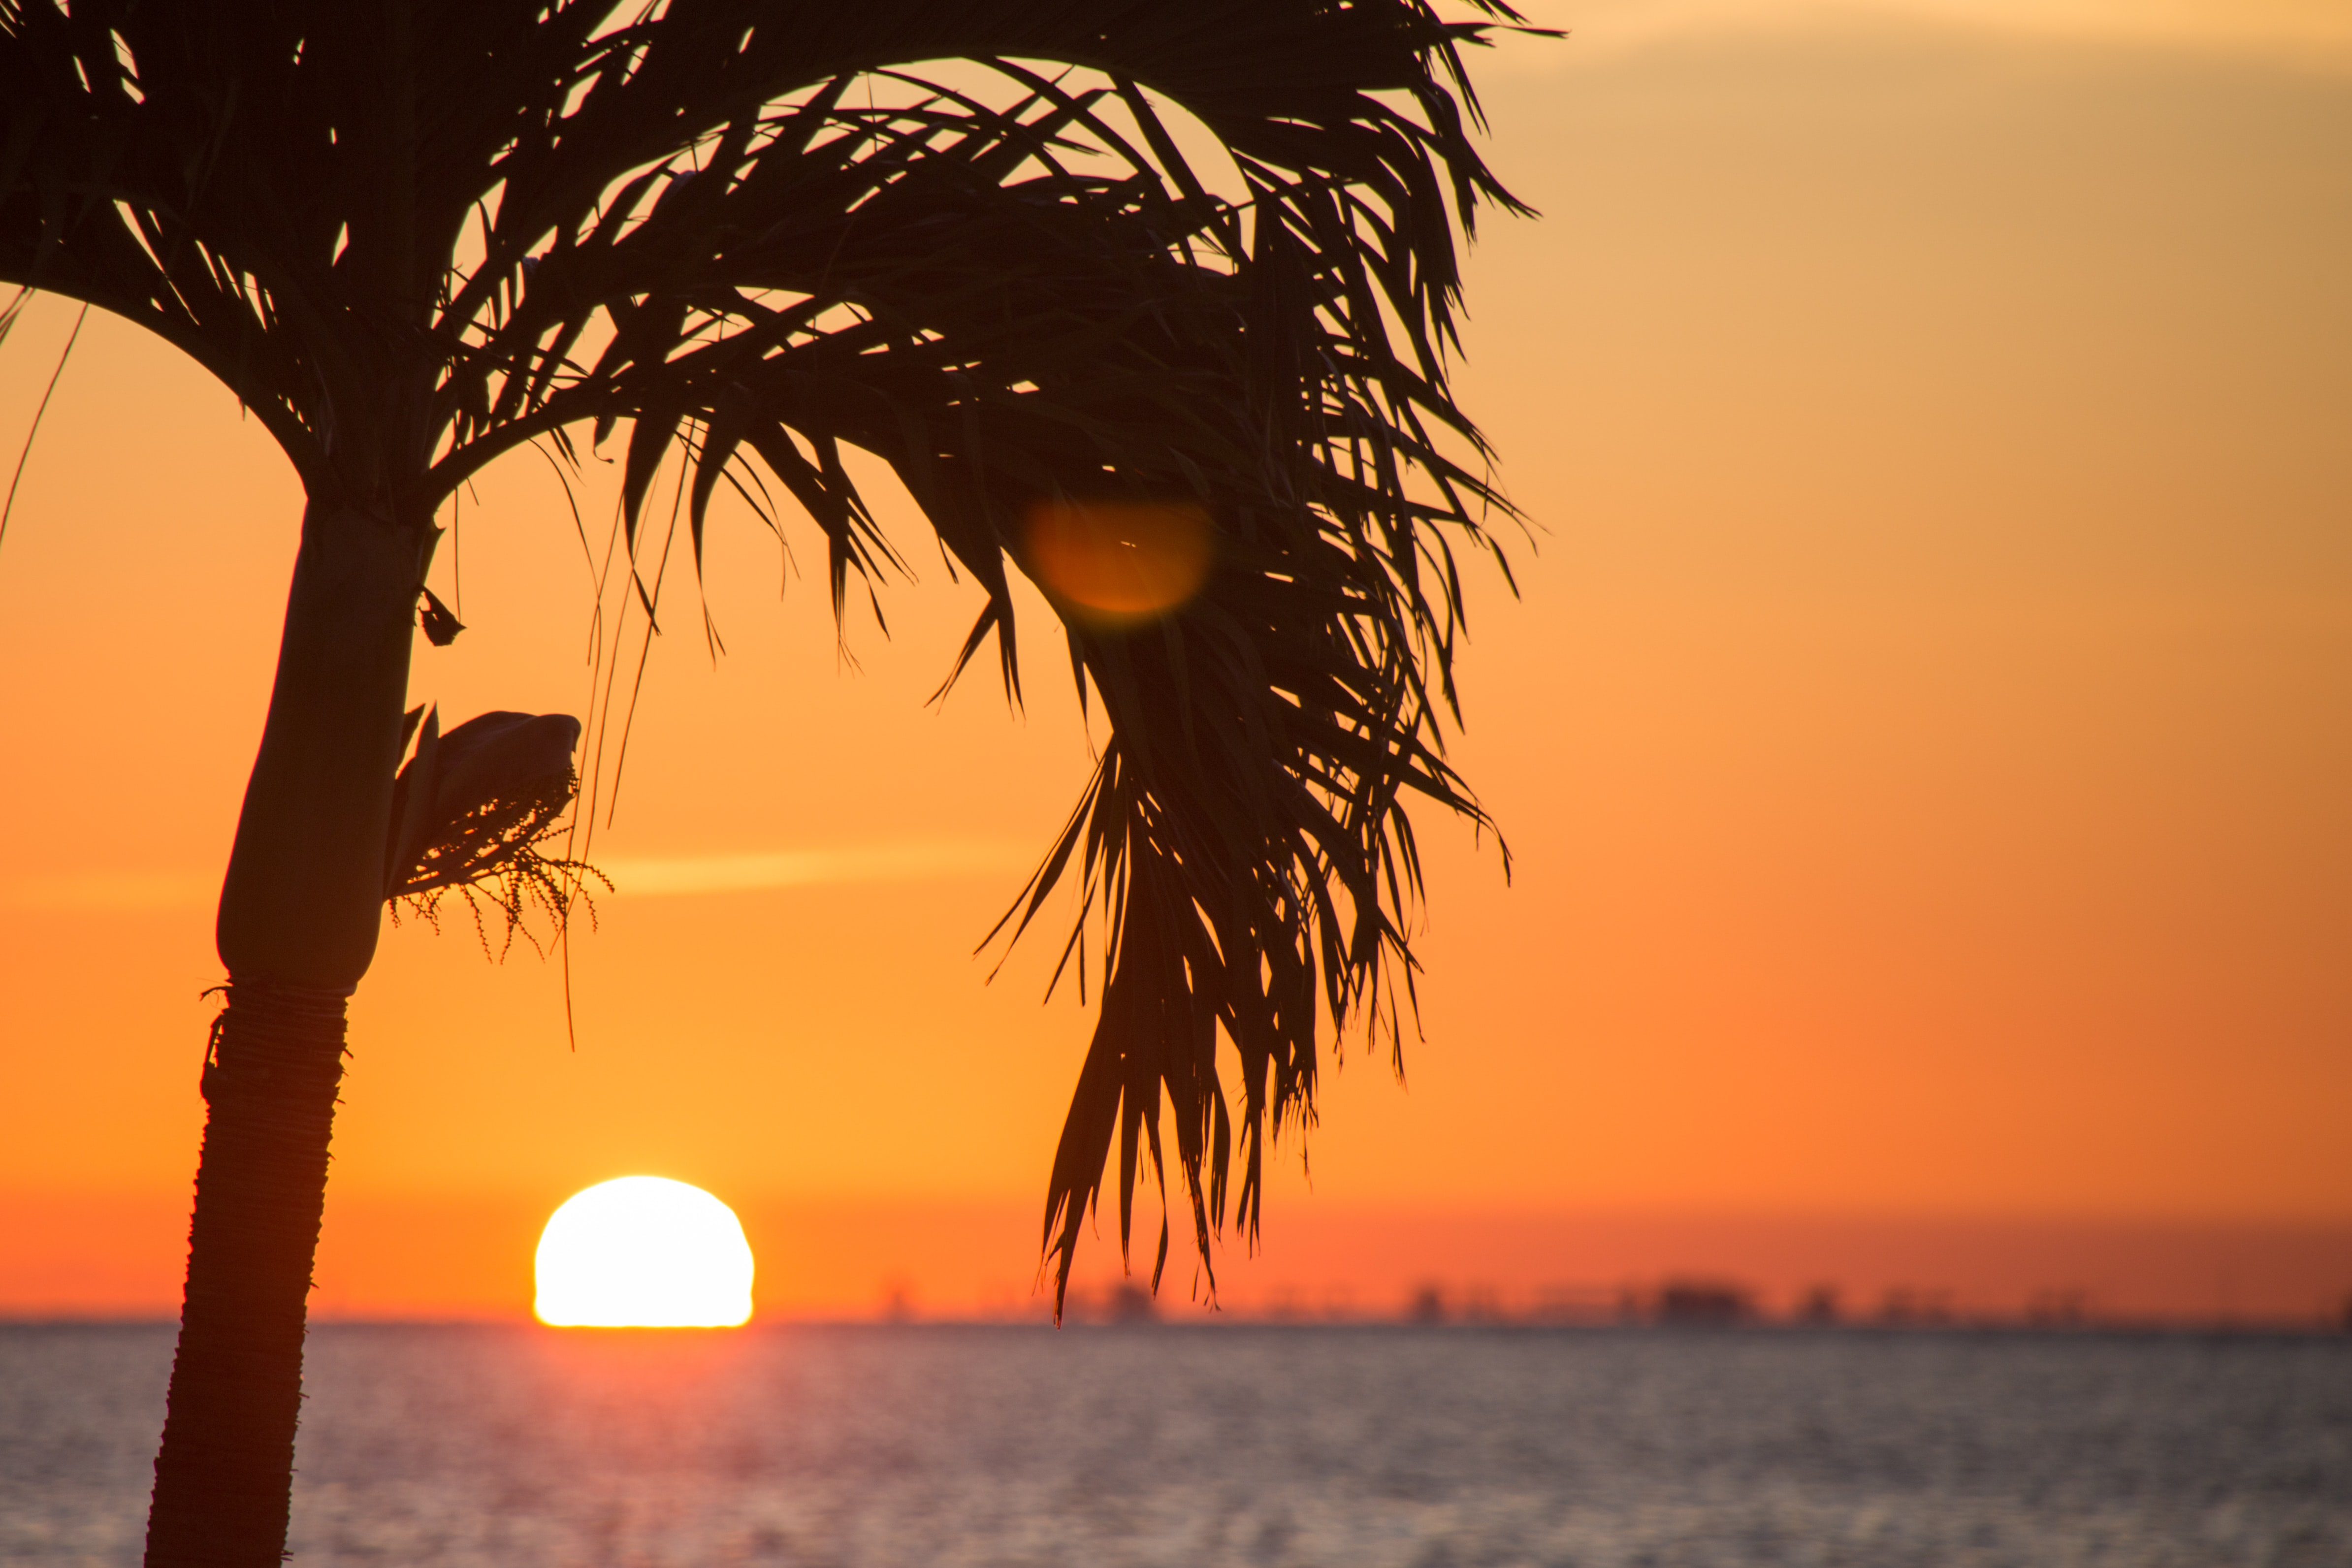 A palm tree and a beautiful sunset over the water in Florida